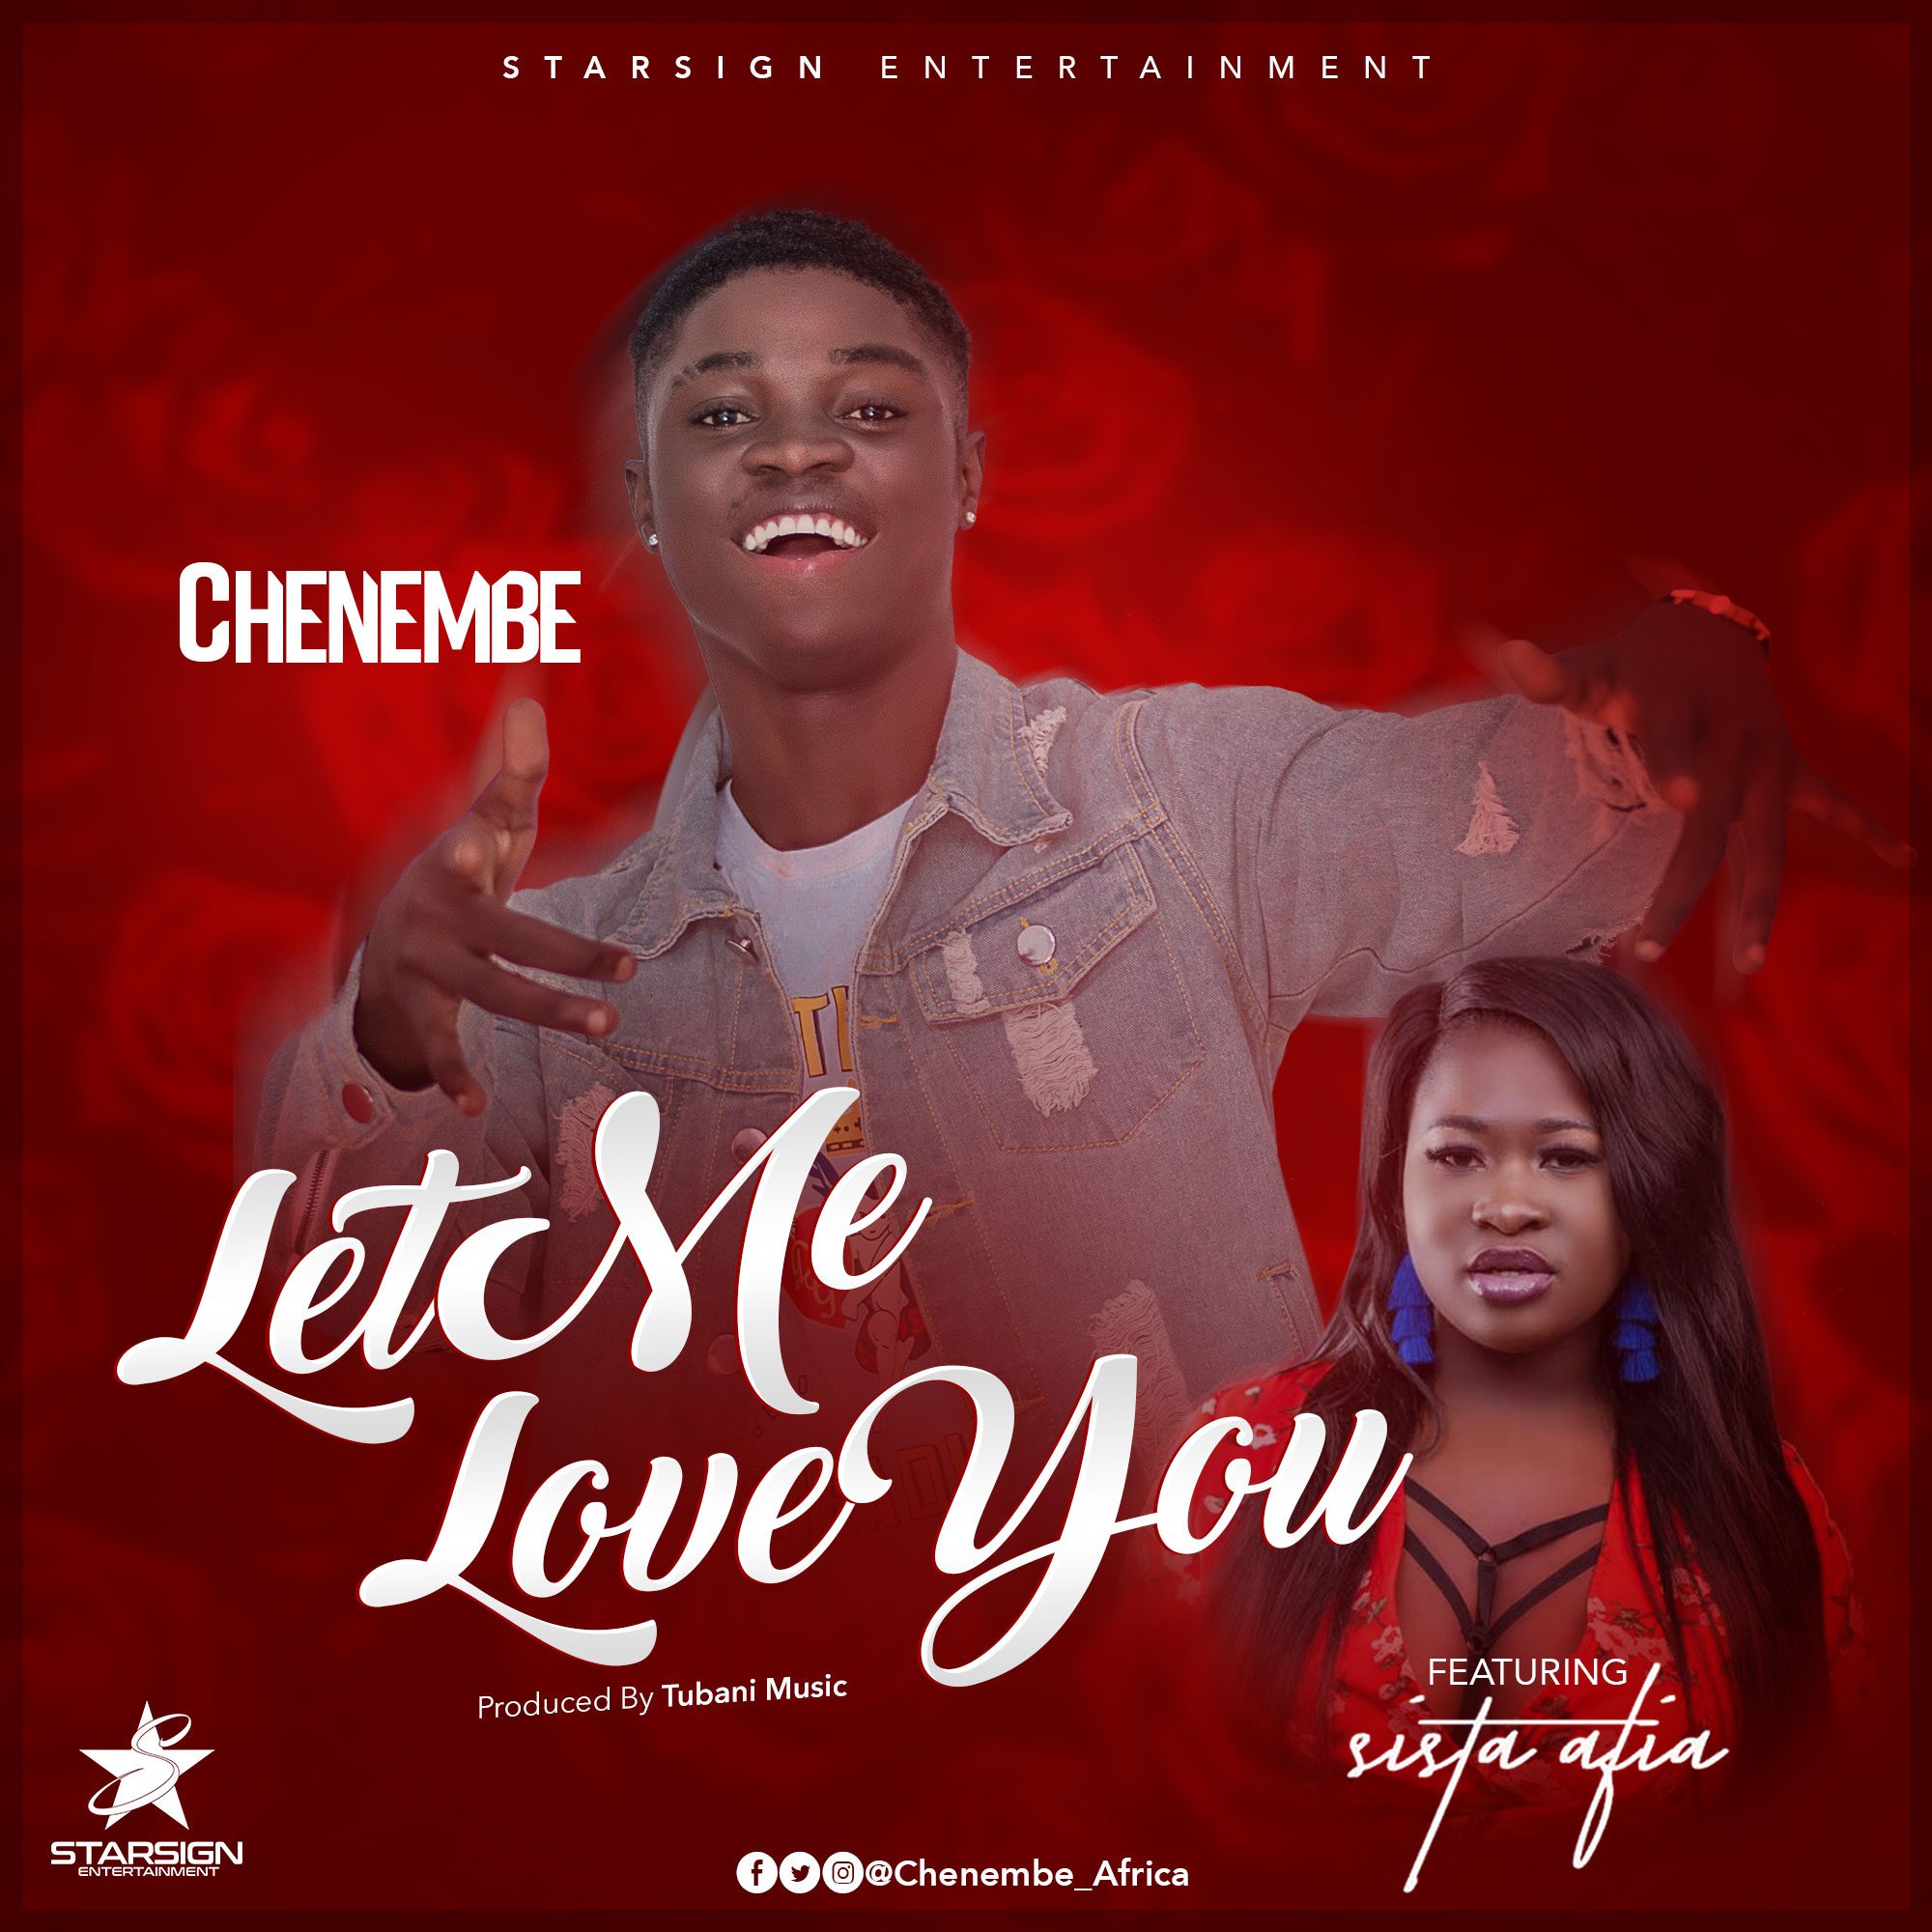 Audio+Video: Chenembe ft. Sista Afia – Let Me Love You (Prod. By Tubhani Music)